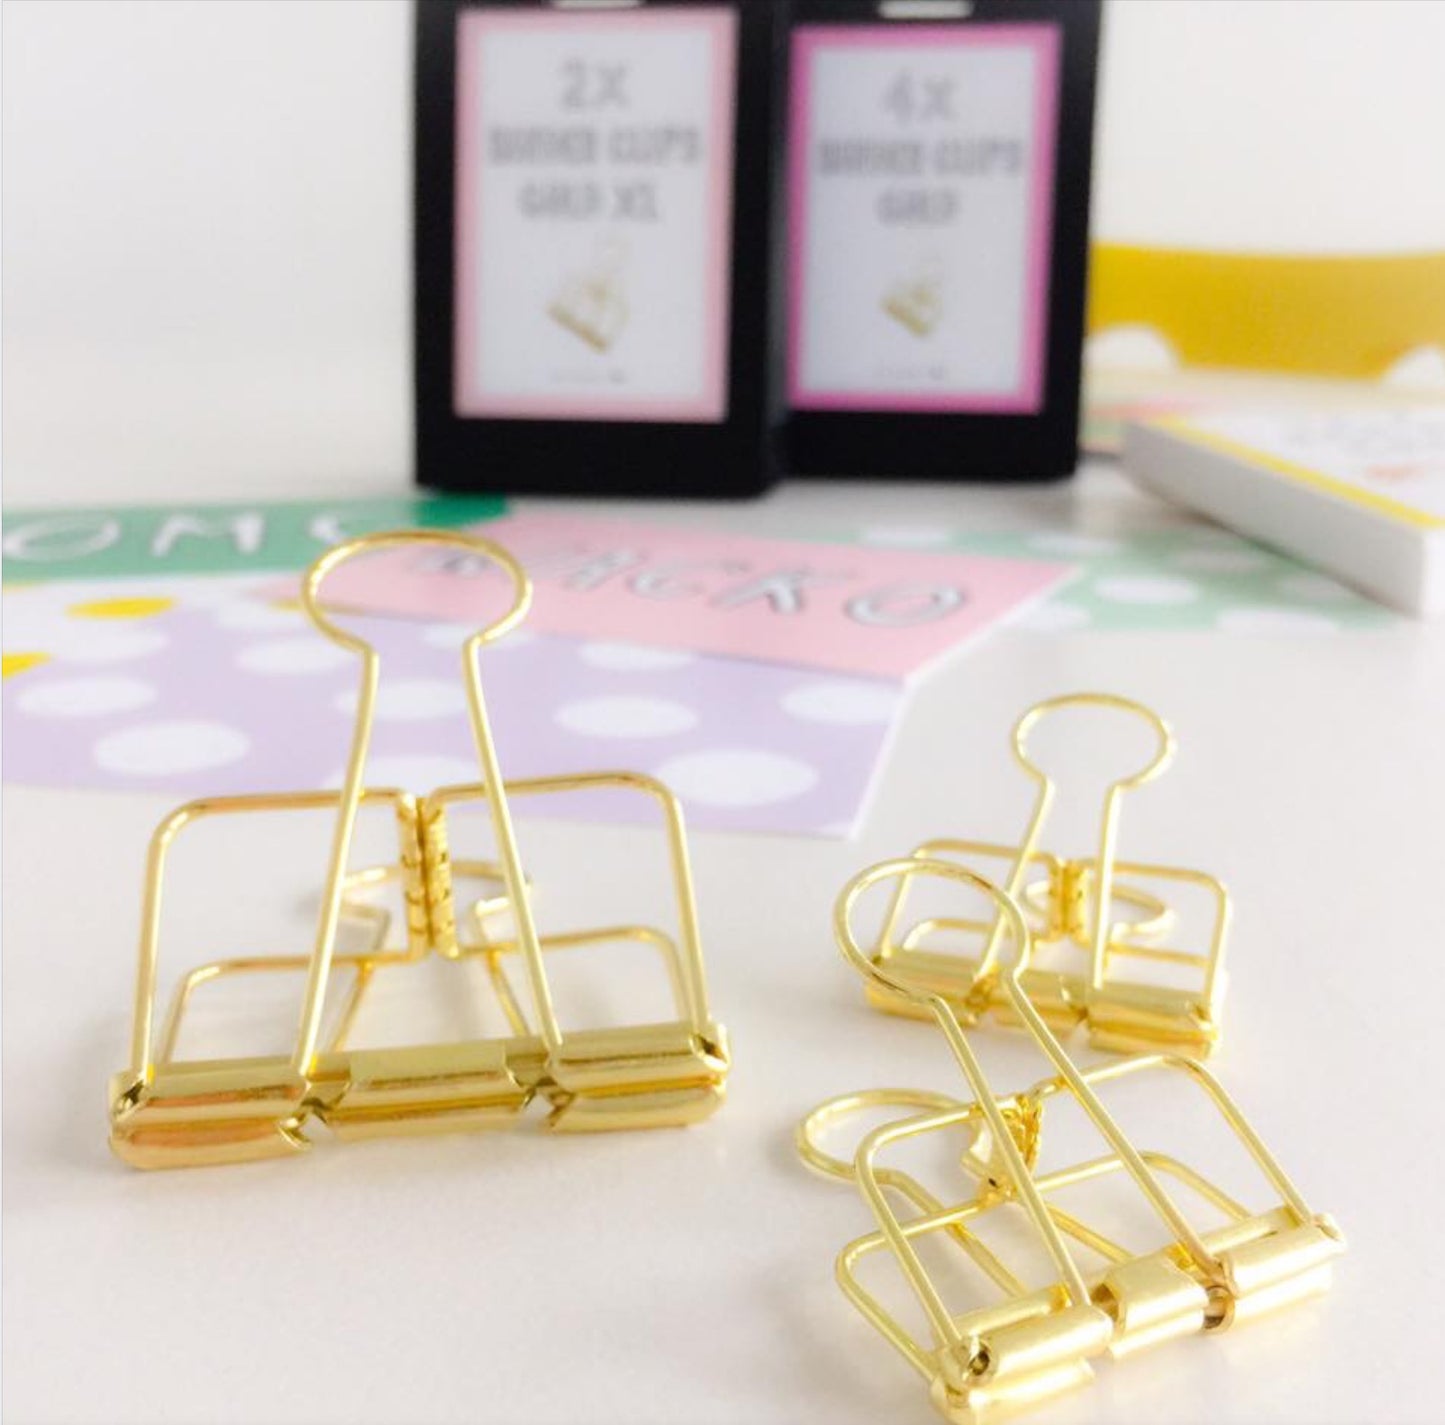 1 large and 2 medium size metal binders clips in gold 